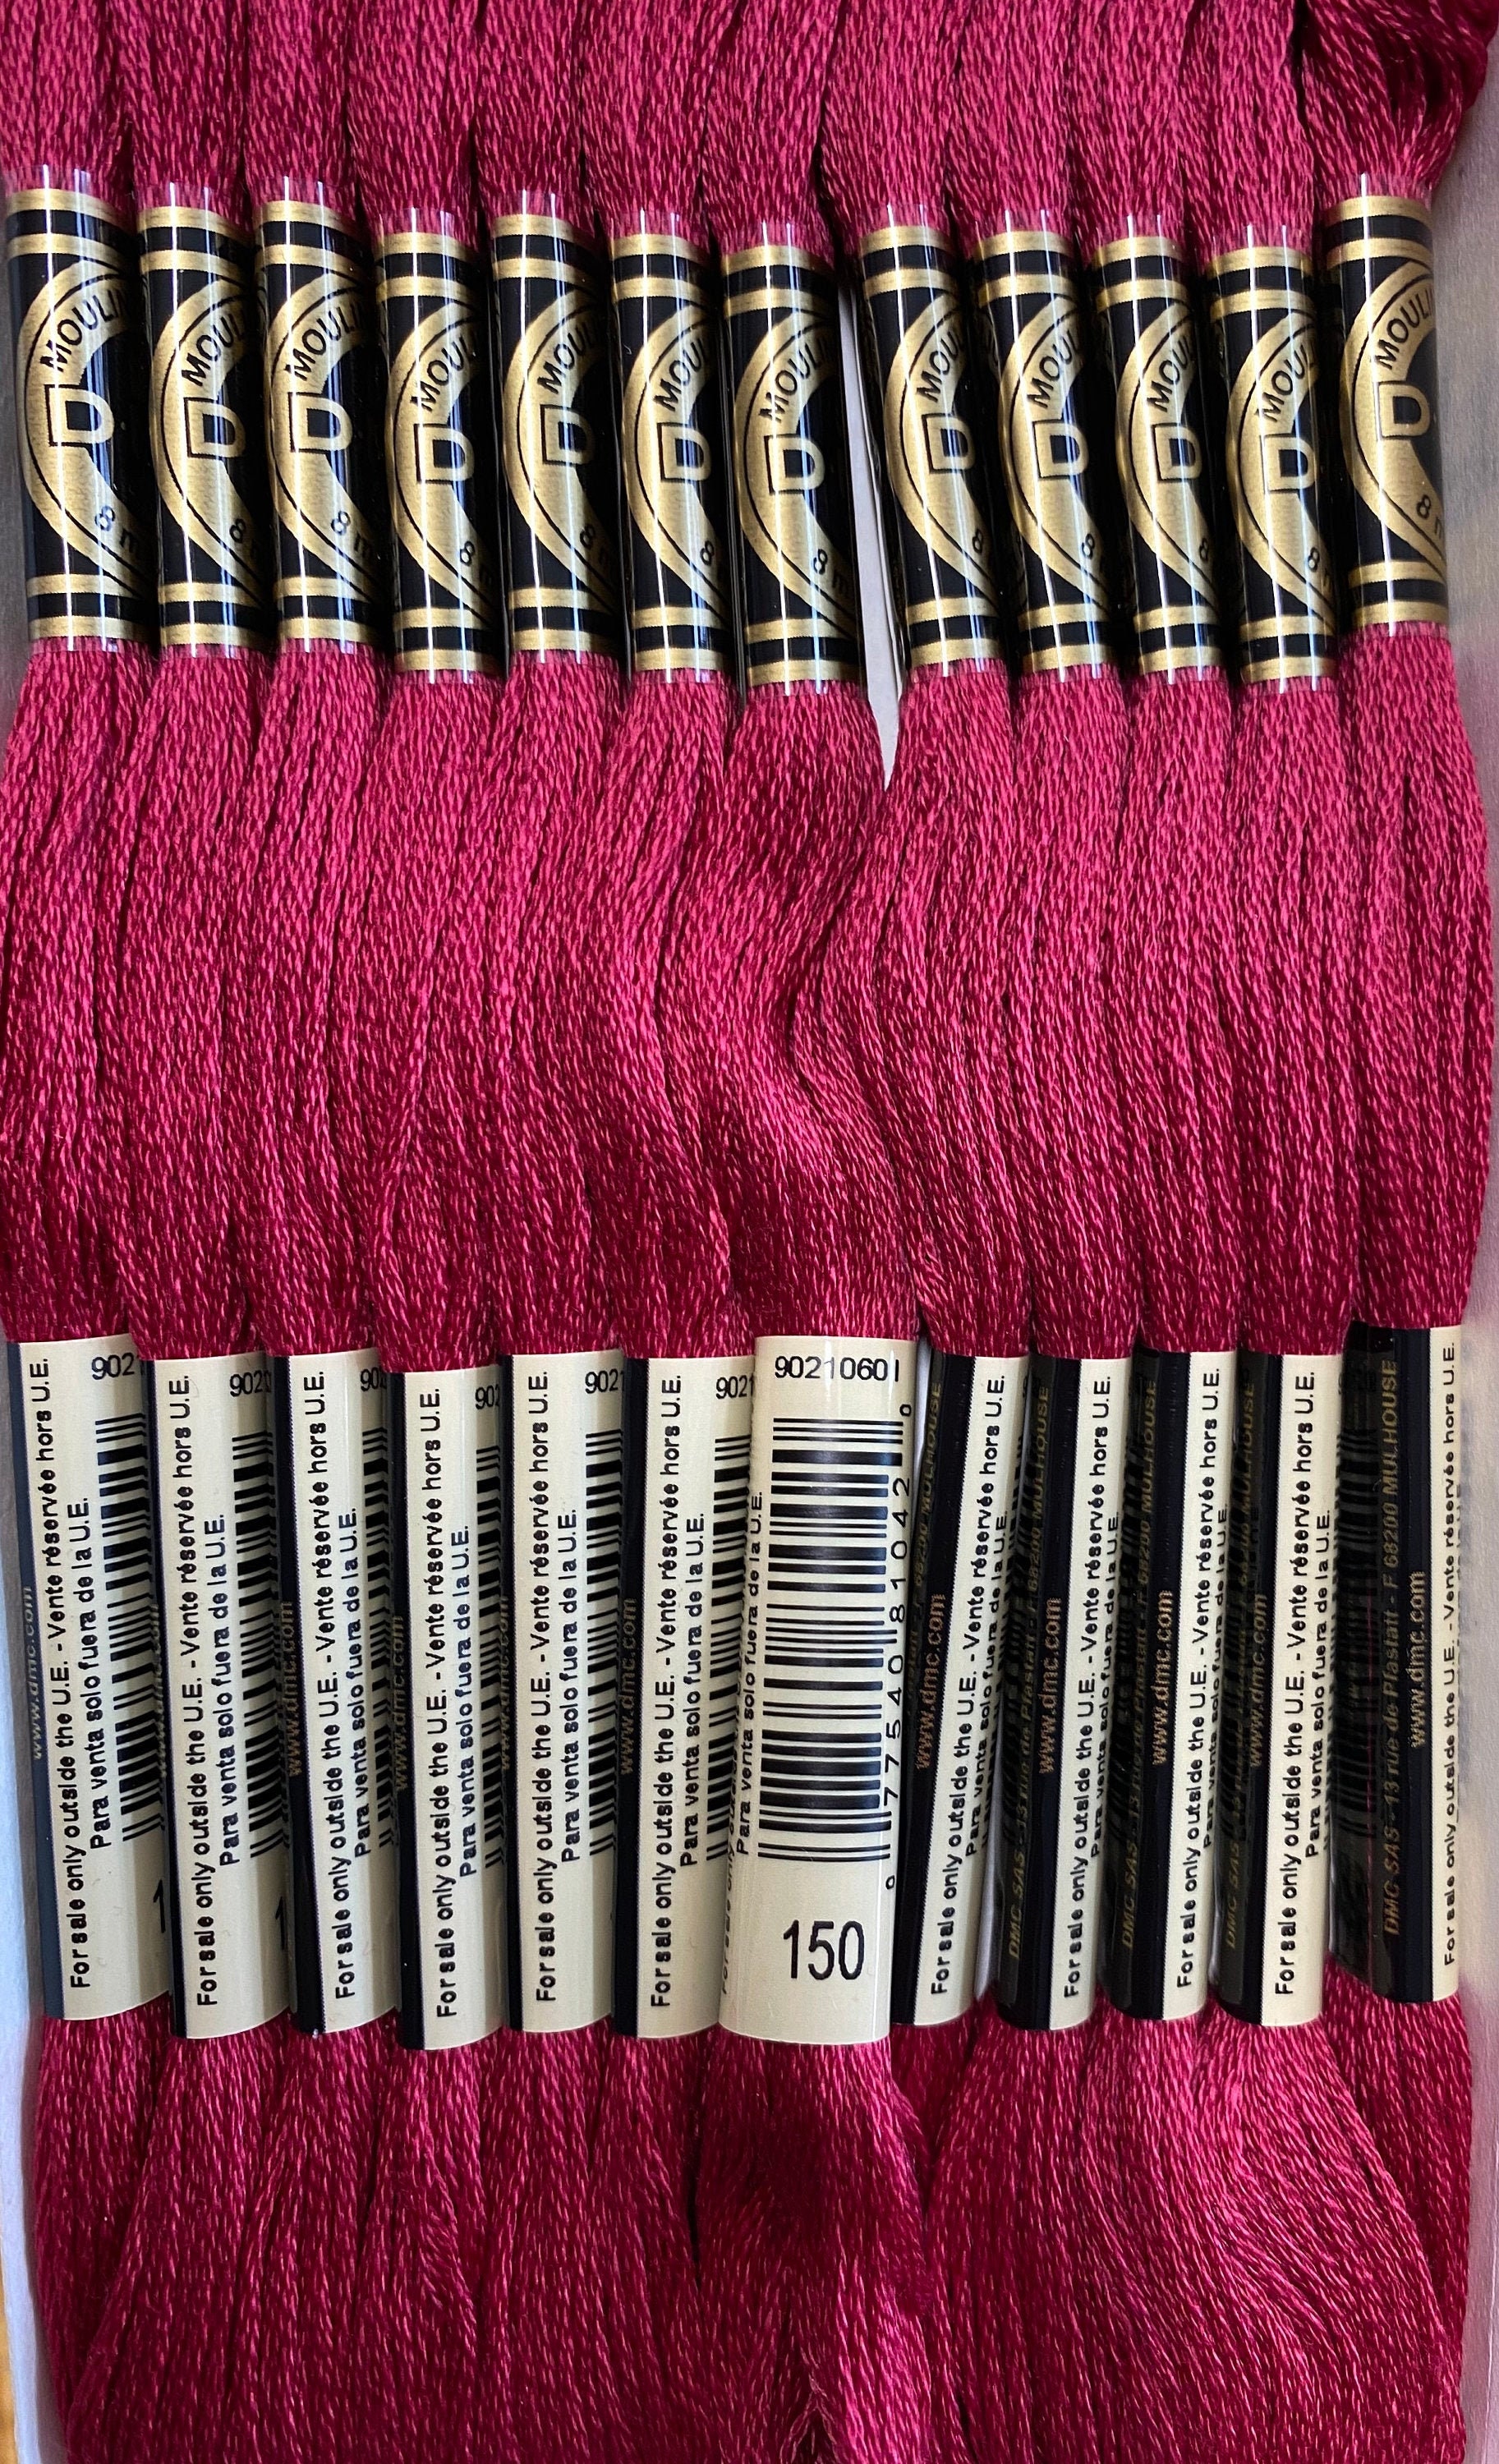 25 Pcs Cotton Red Thread Needlepoint Sewing Cross Embroidery Floss Skein  Stitch